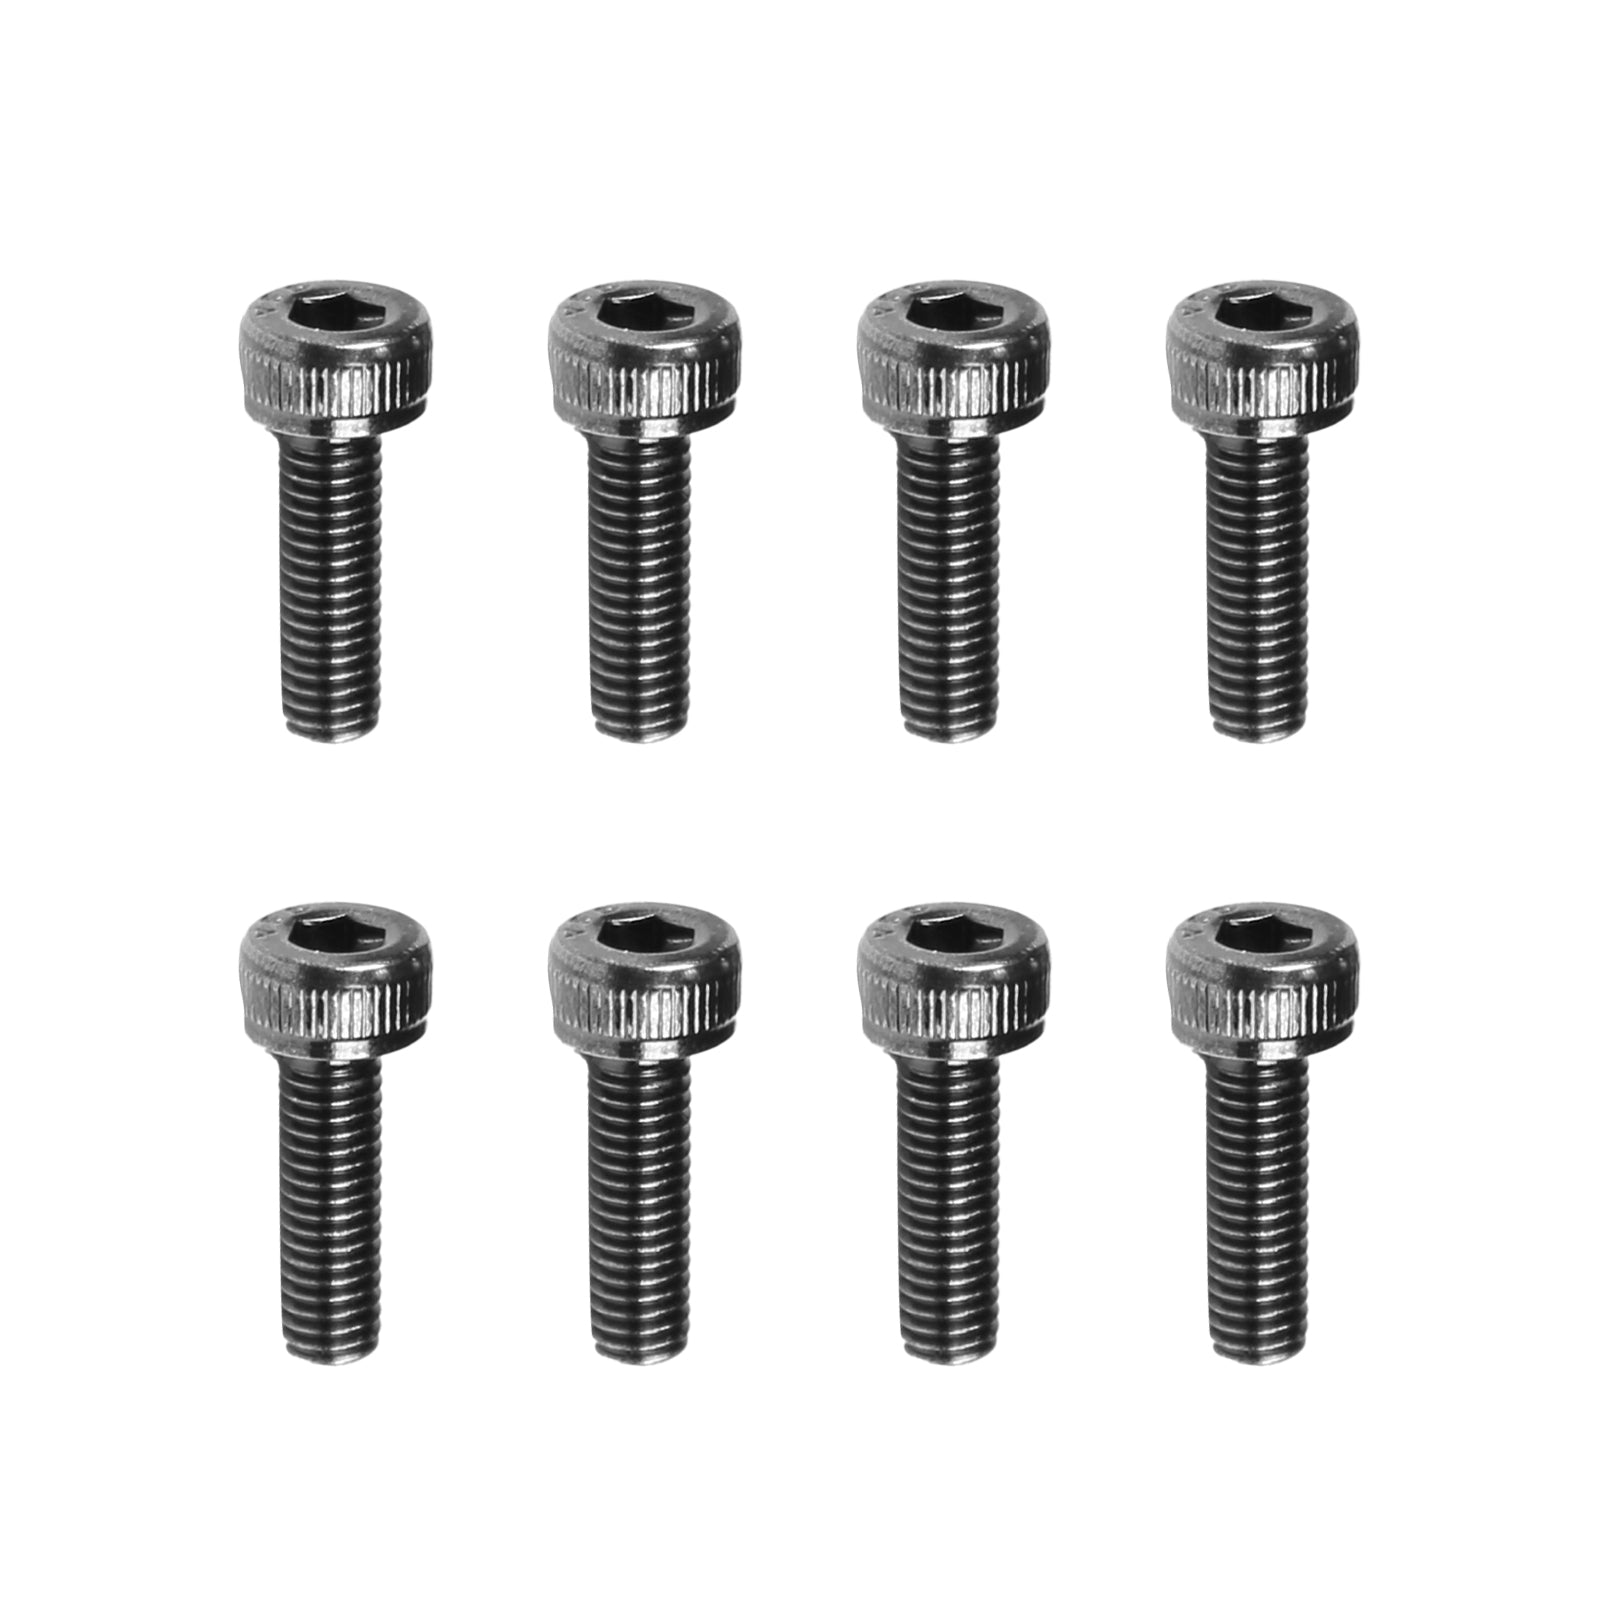 OMP HOBBY M7 Helicopter Parts Hex Screw M3x10 OSHM7111